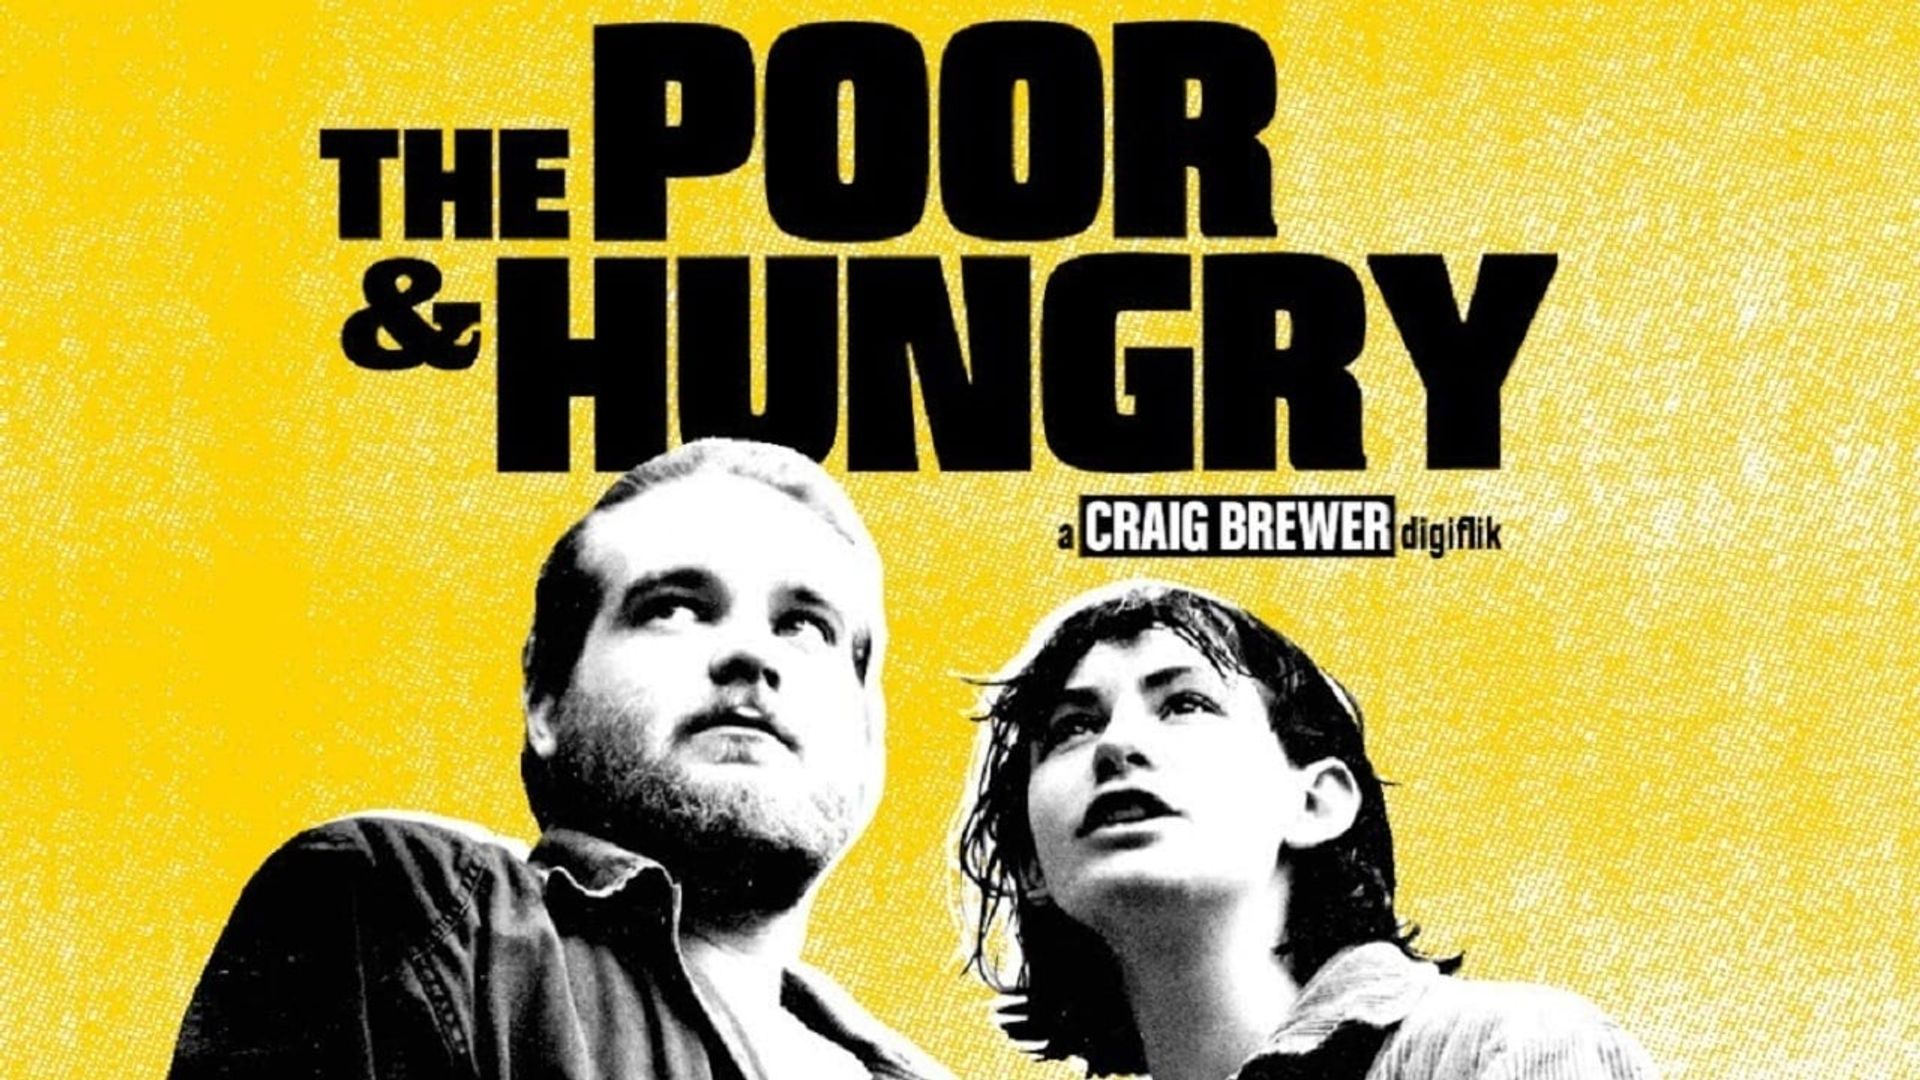 The Poor & Hungry background